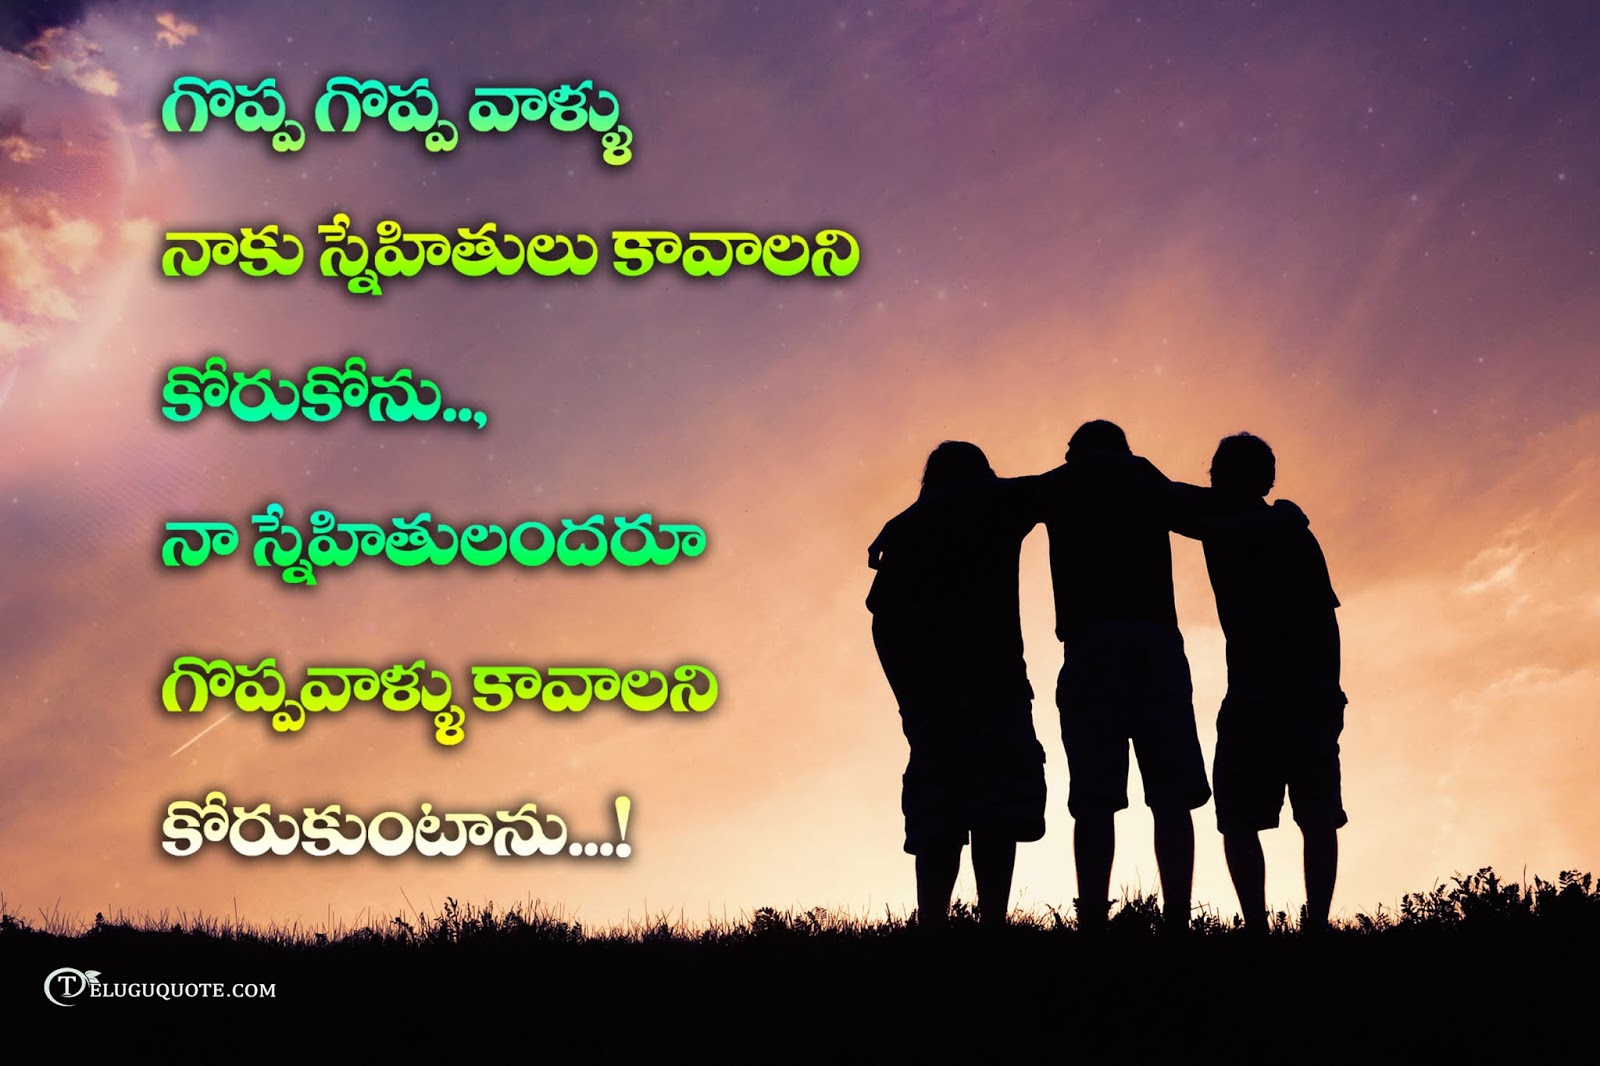 Friendship Images With Quotes In Telugu - Roberto Blog